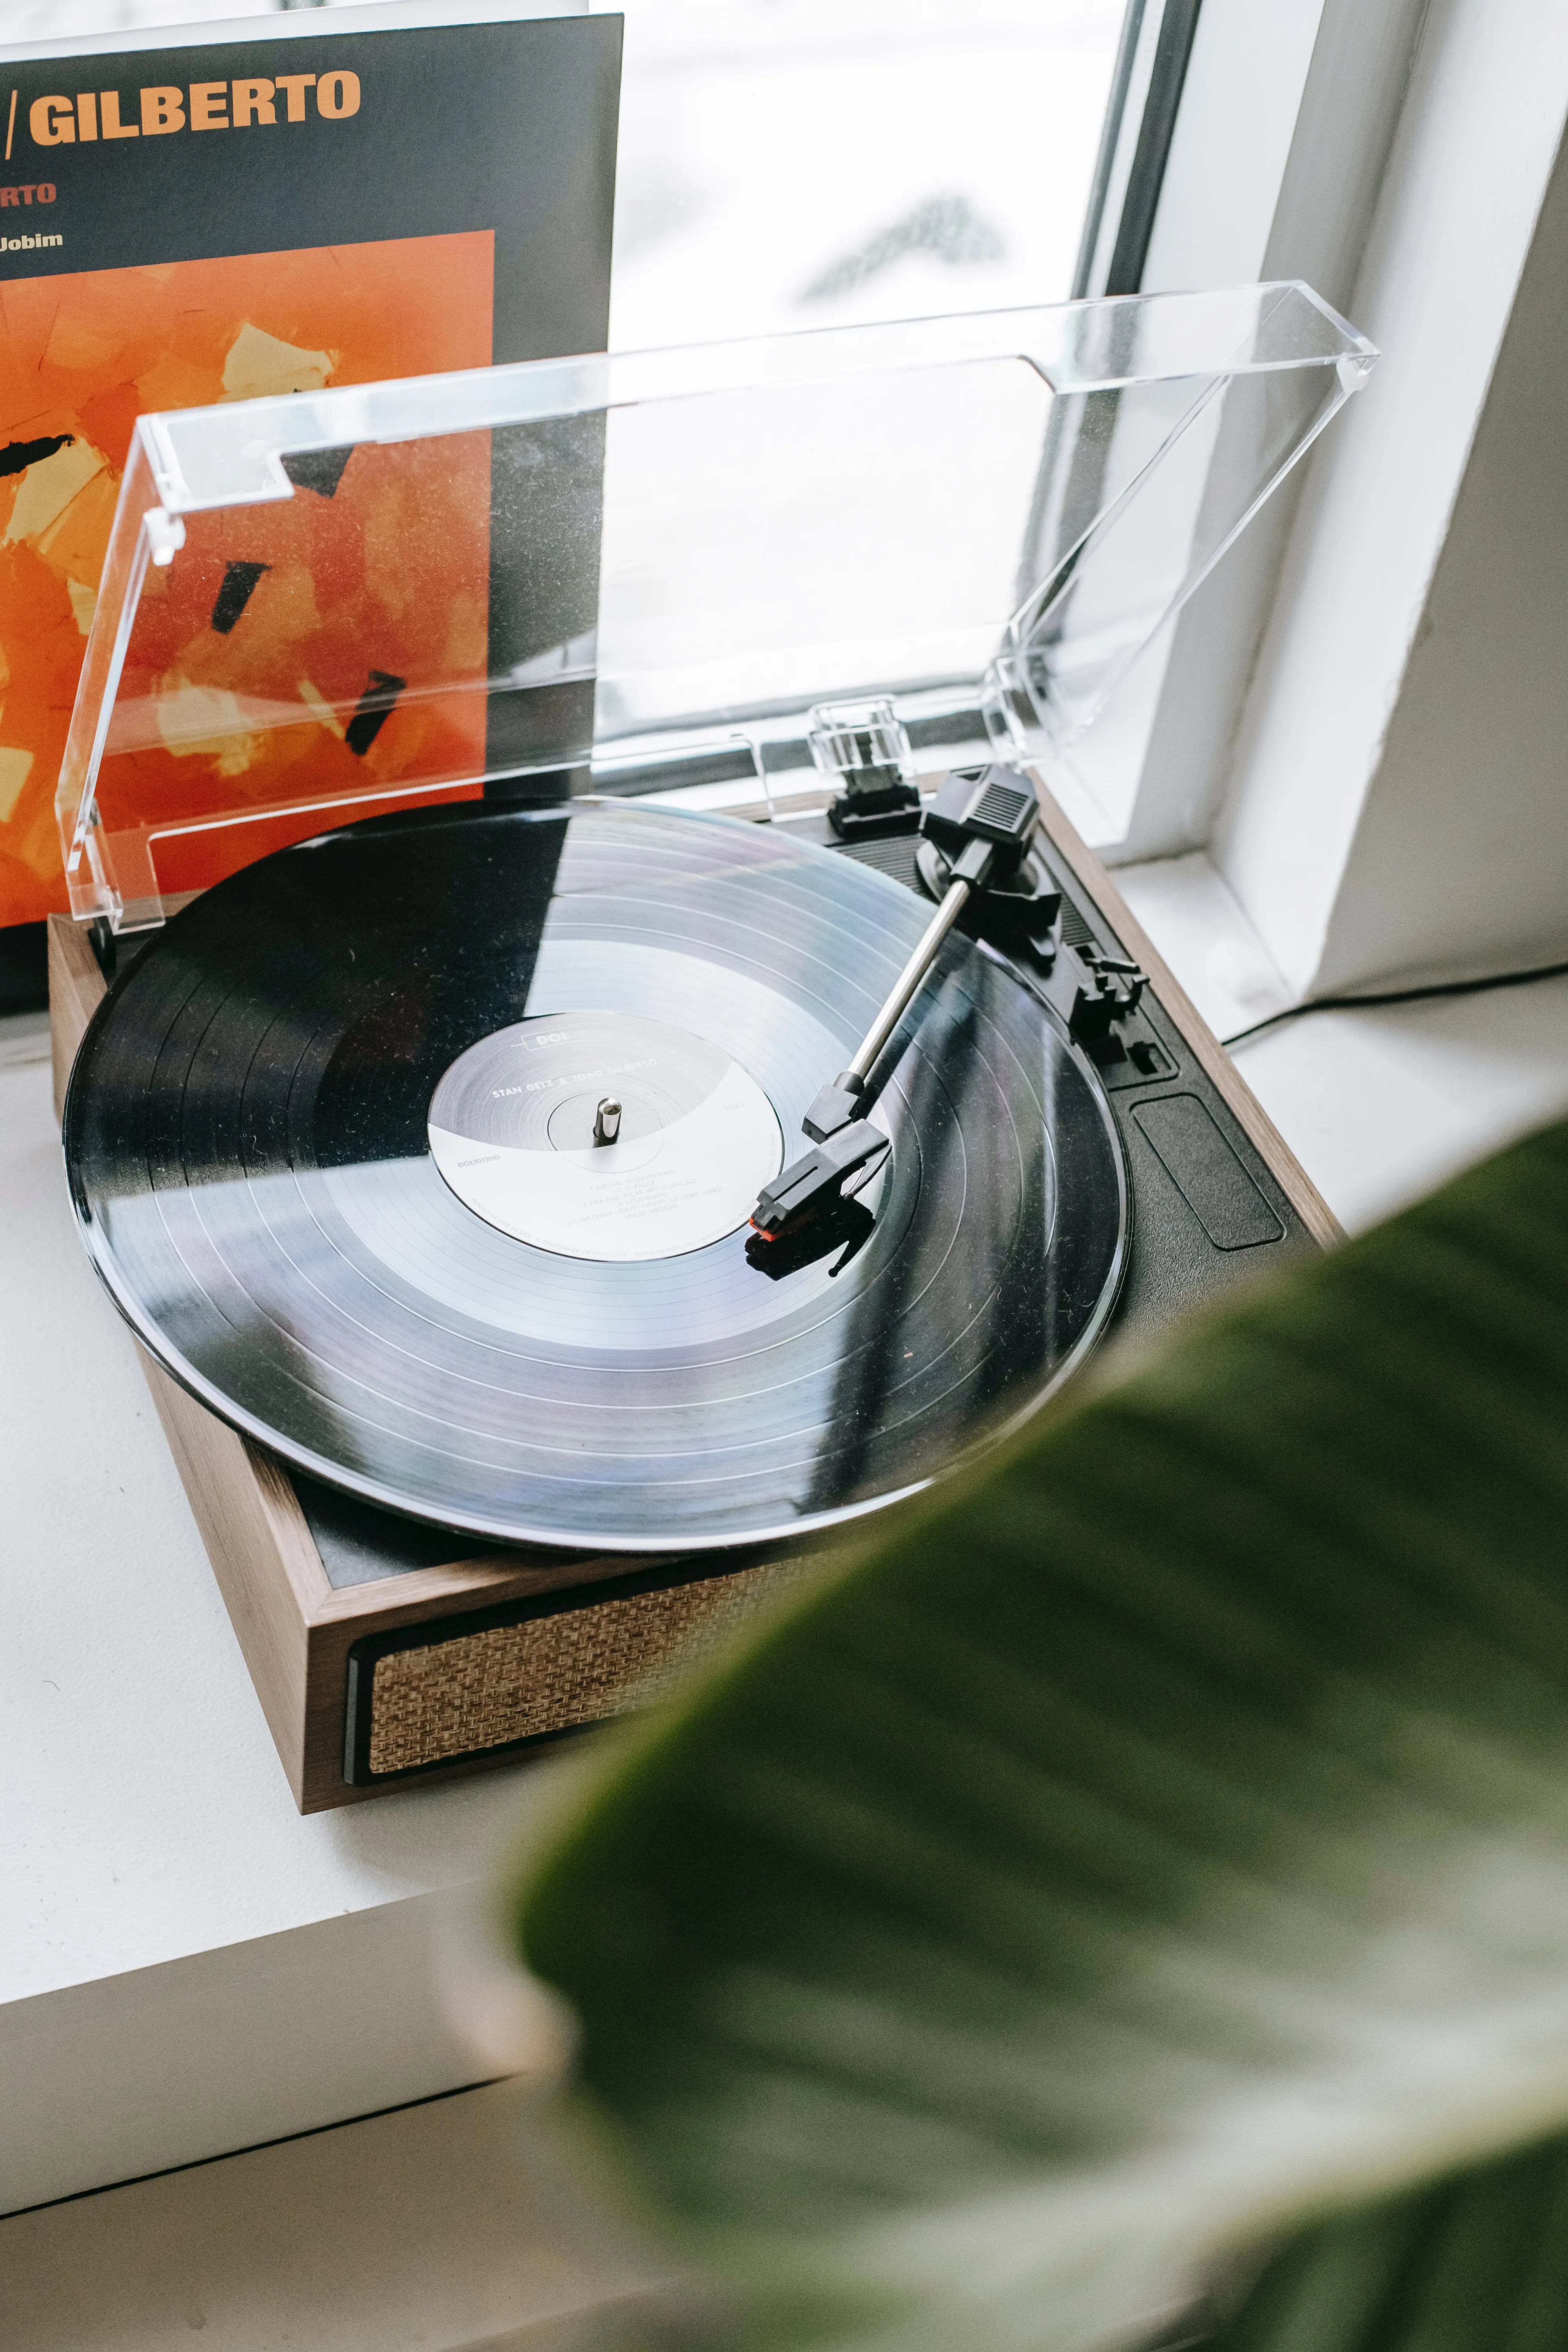 The Renaissance of Vinyl Records in the Digital Age